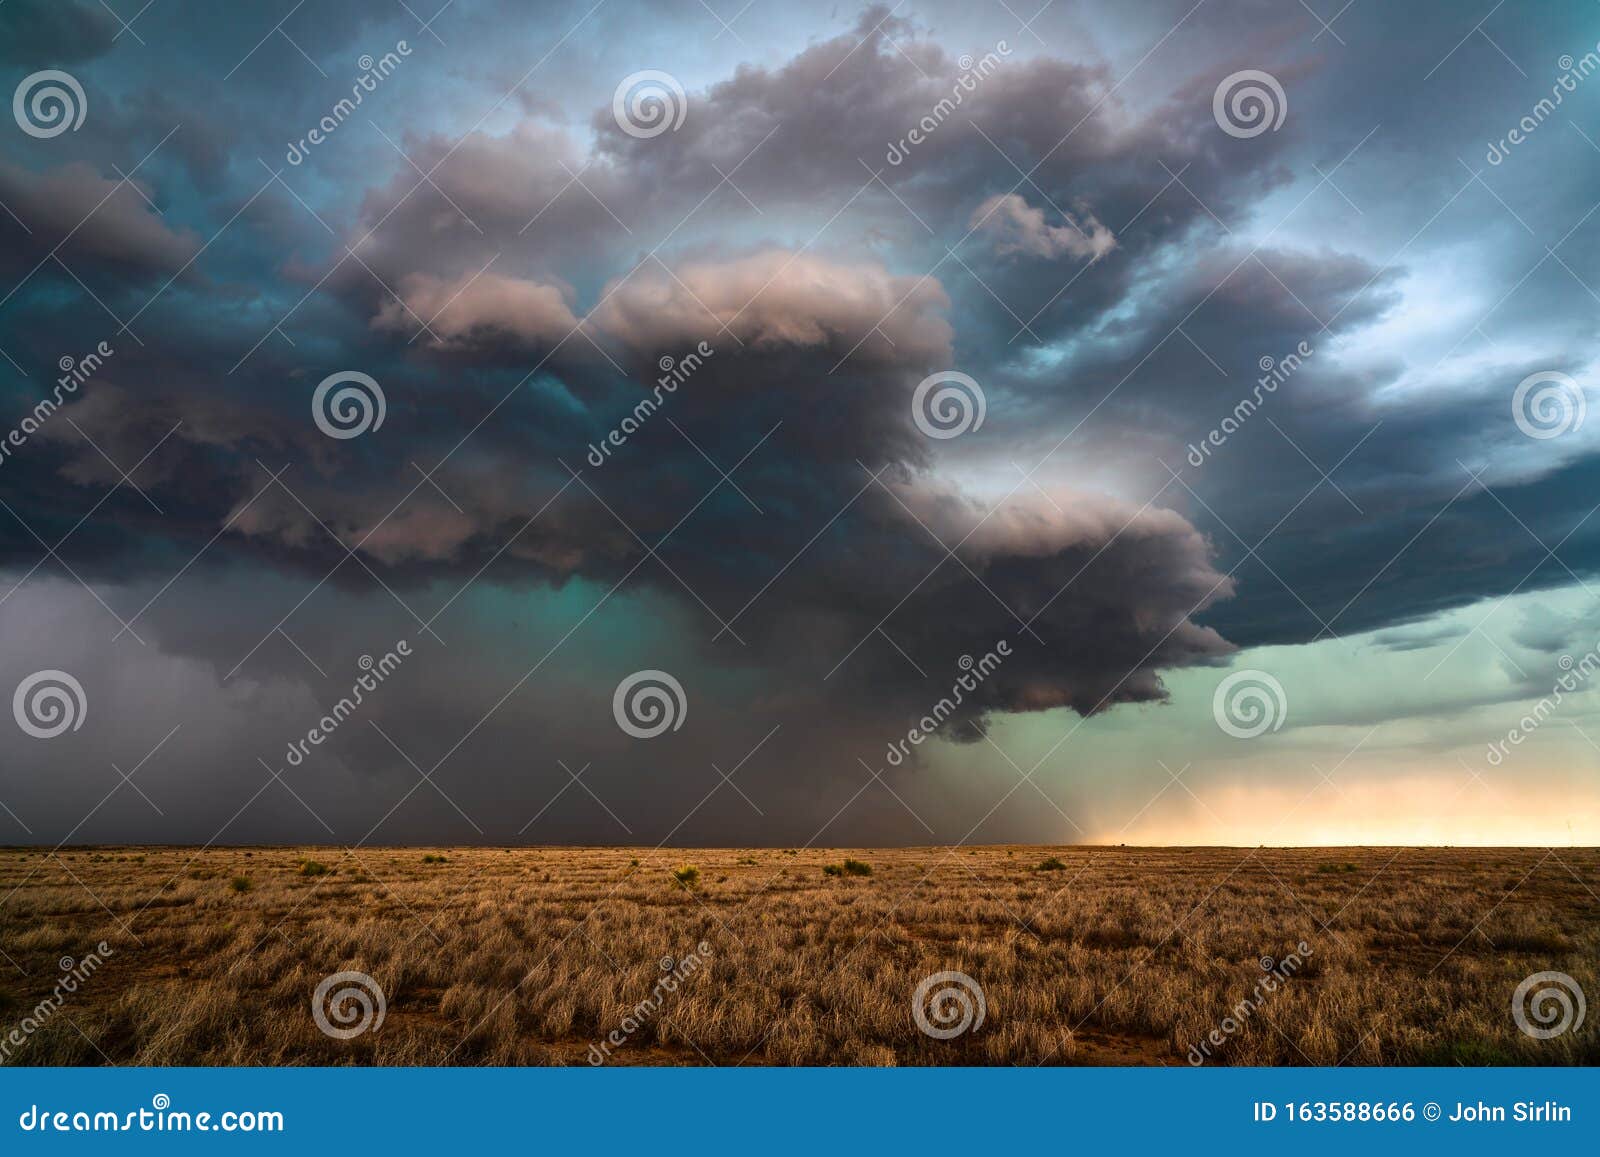 supercell thunderstorm with dark clouds and dramatic sky